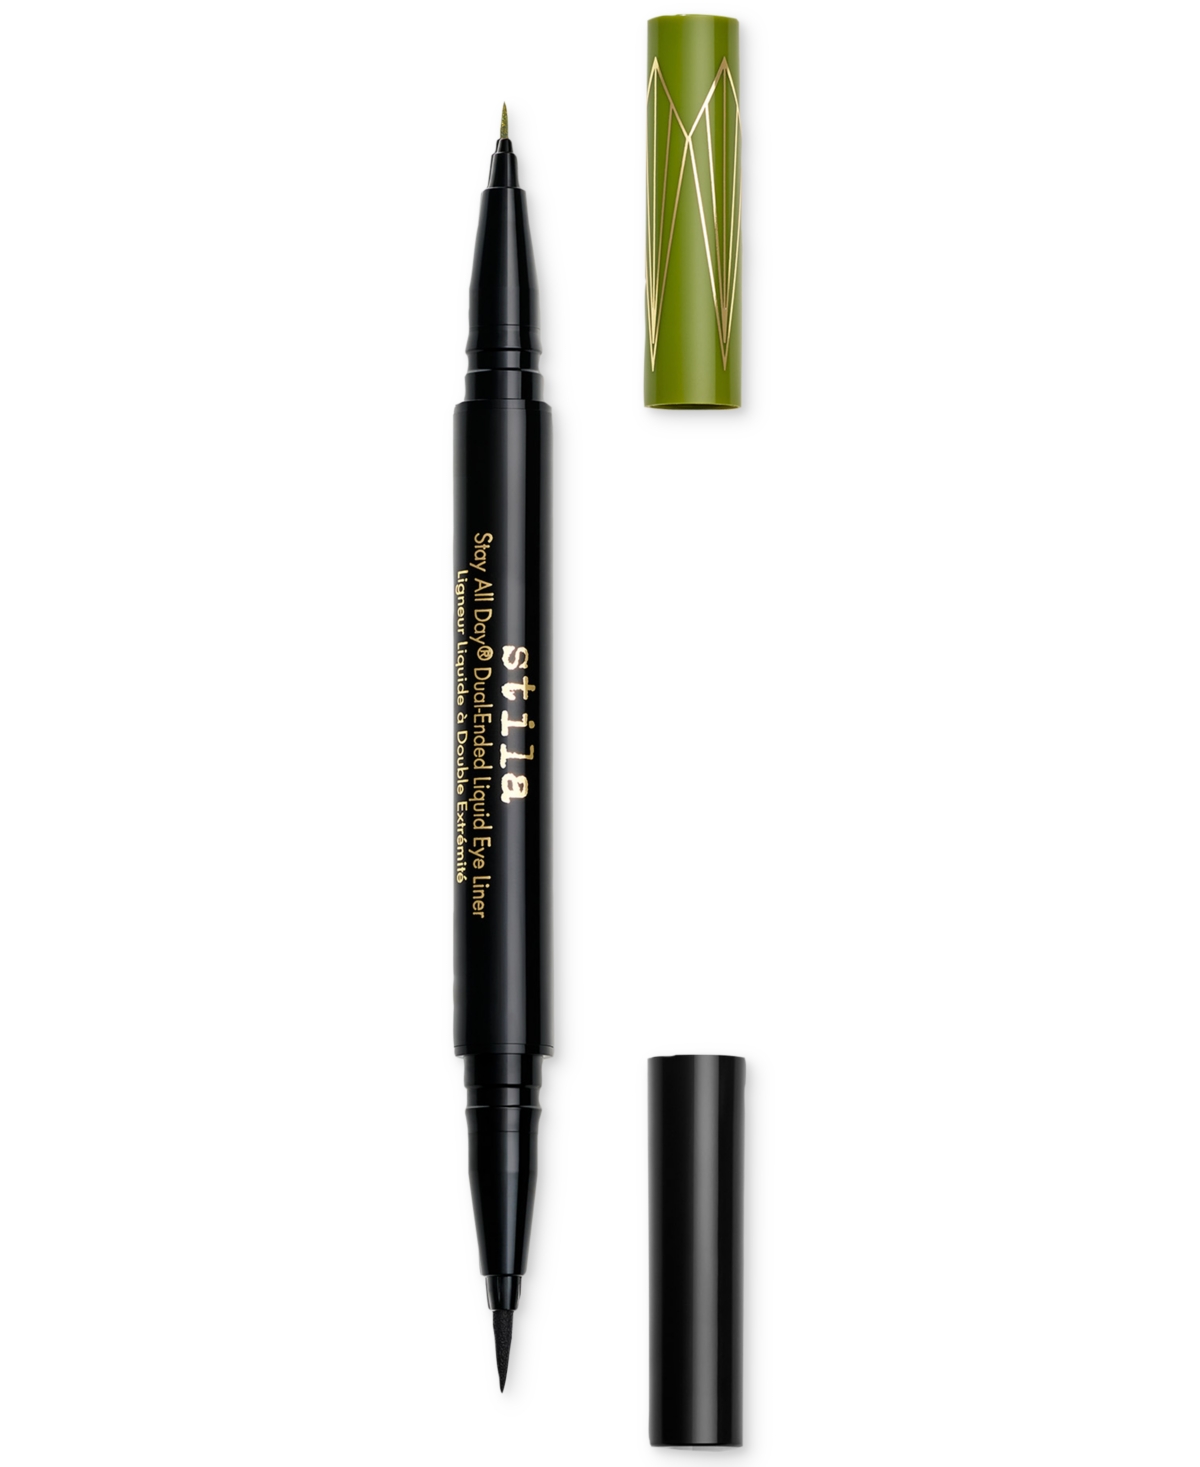 Stila Stay All Day Dual-ended Liquid Eye Liner In Mojito